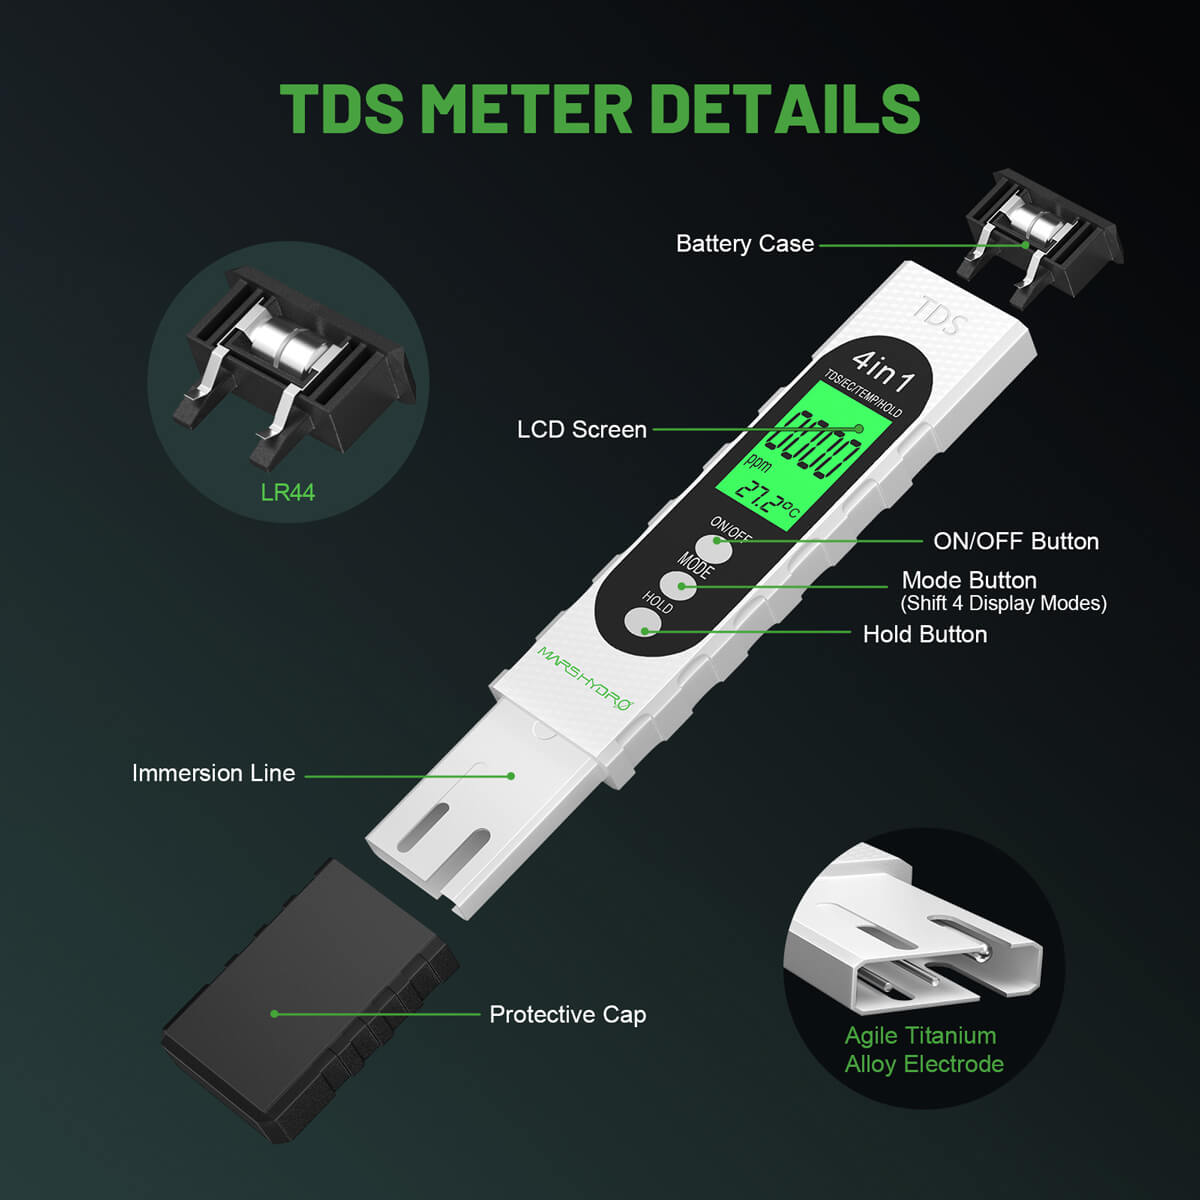 Mars Hydro TDS meter specification